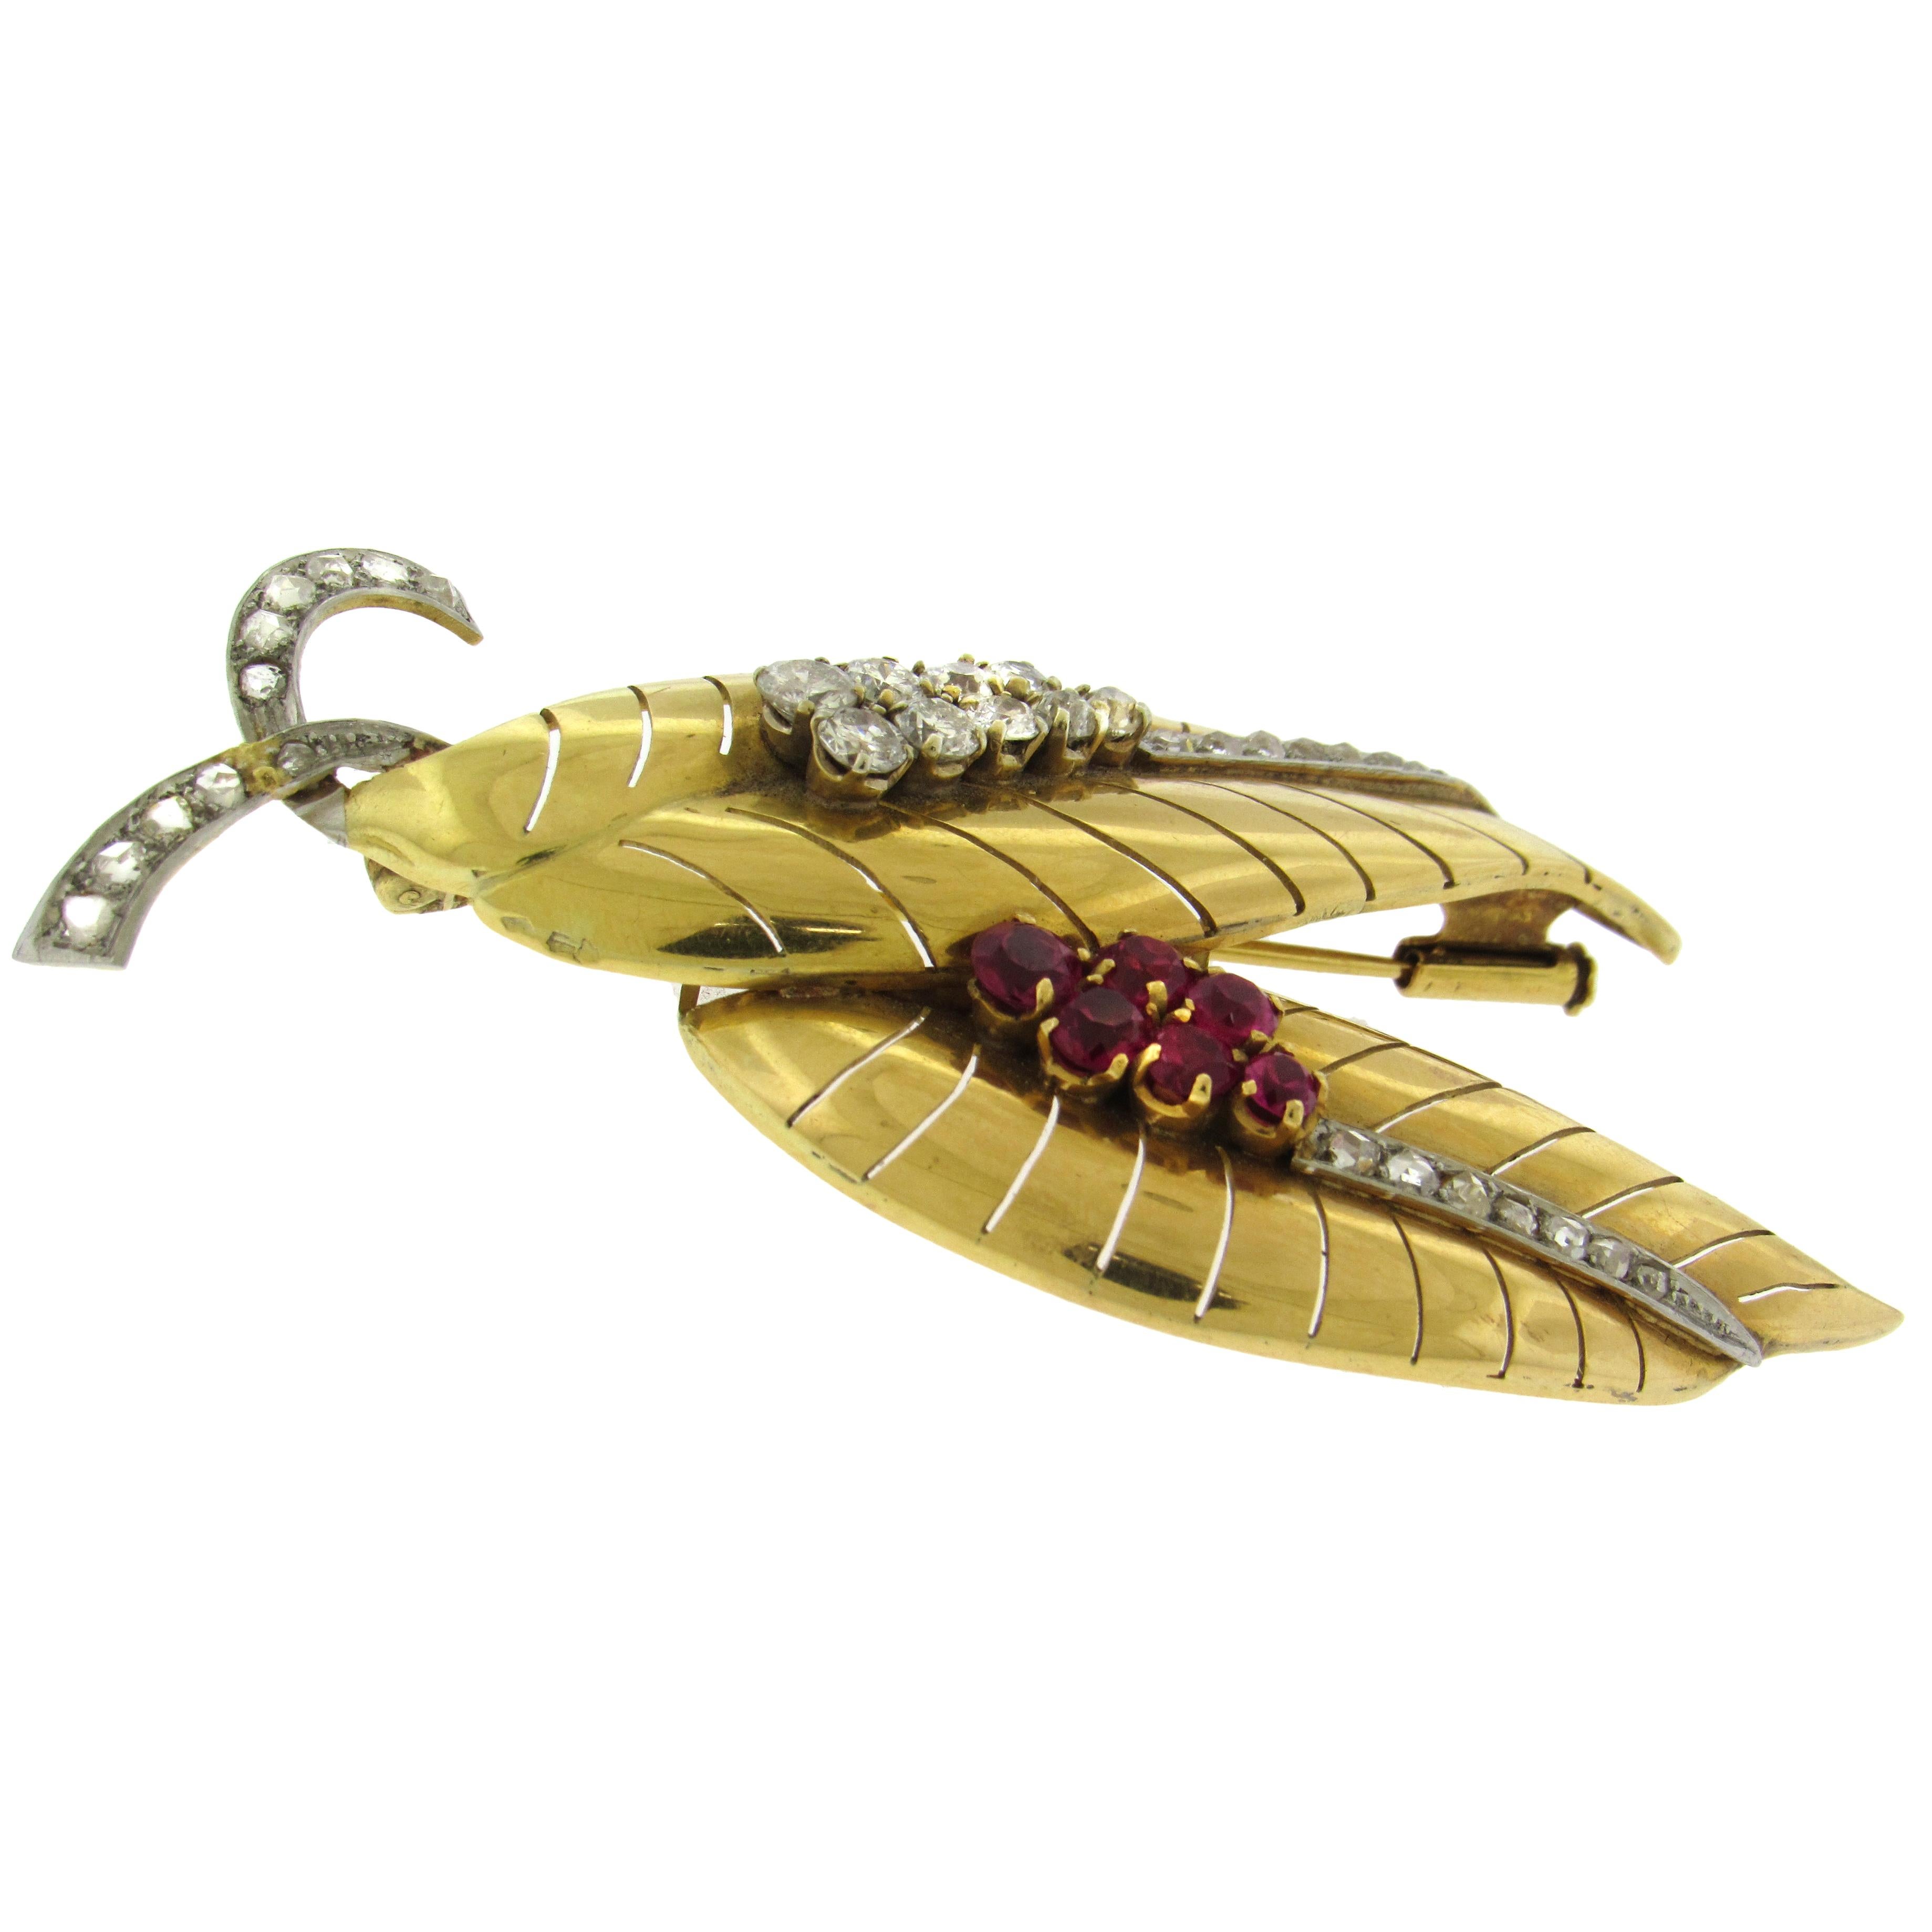 18K yellow gold stylized leaf pin features two serrated tropical-style leaves, set with rubies and mixed cut old European, modern and rose-cut diamonds set on the stems and veins of the leaves. French hallmark.  3-1/8